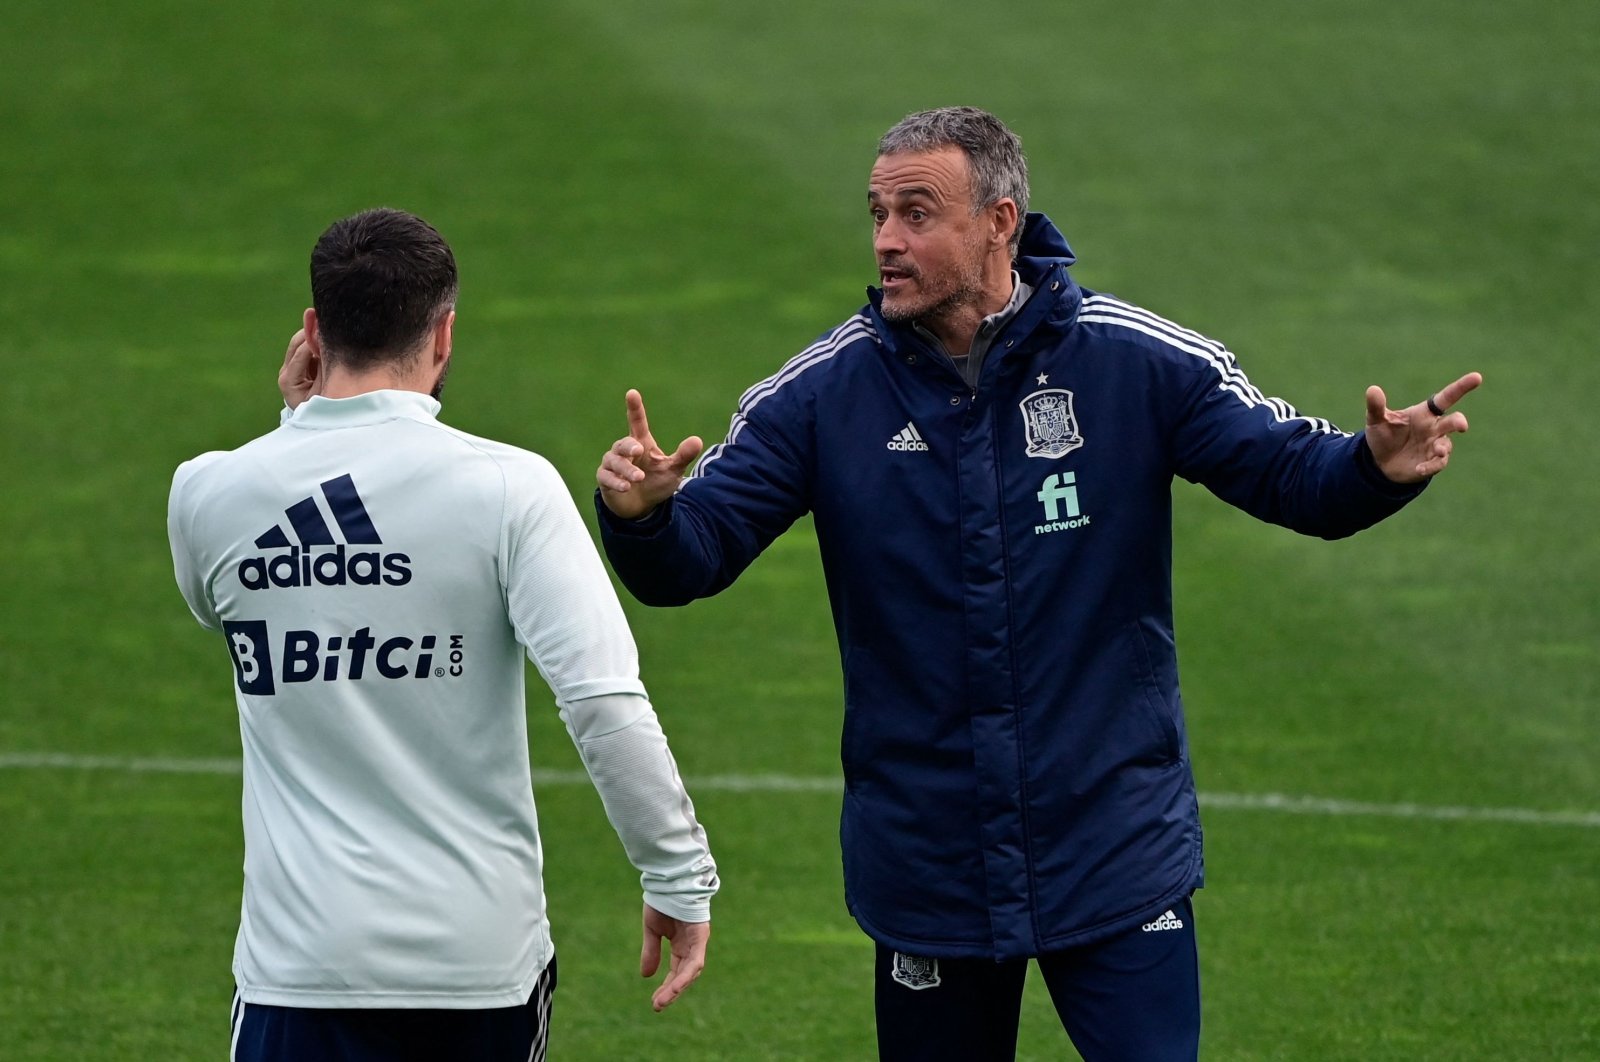 Spain&#039;s coach Luis Enrique (R) speaks with Spanish defender Dani Carvajal during a training session on the eve of a friendly between Spain and Iceland, La Coruna, Spain, March 28, 2022. (AFP Photo)